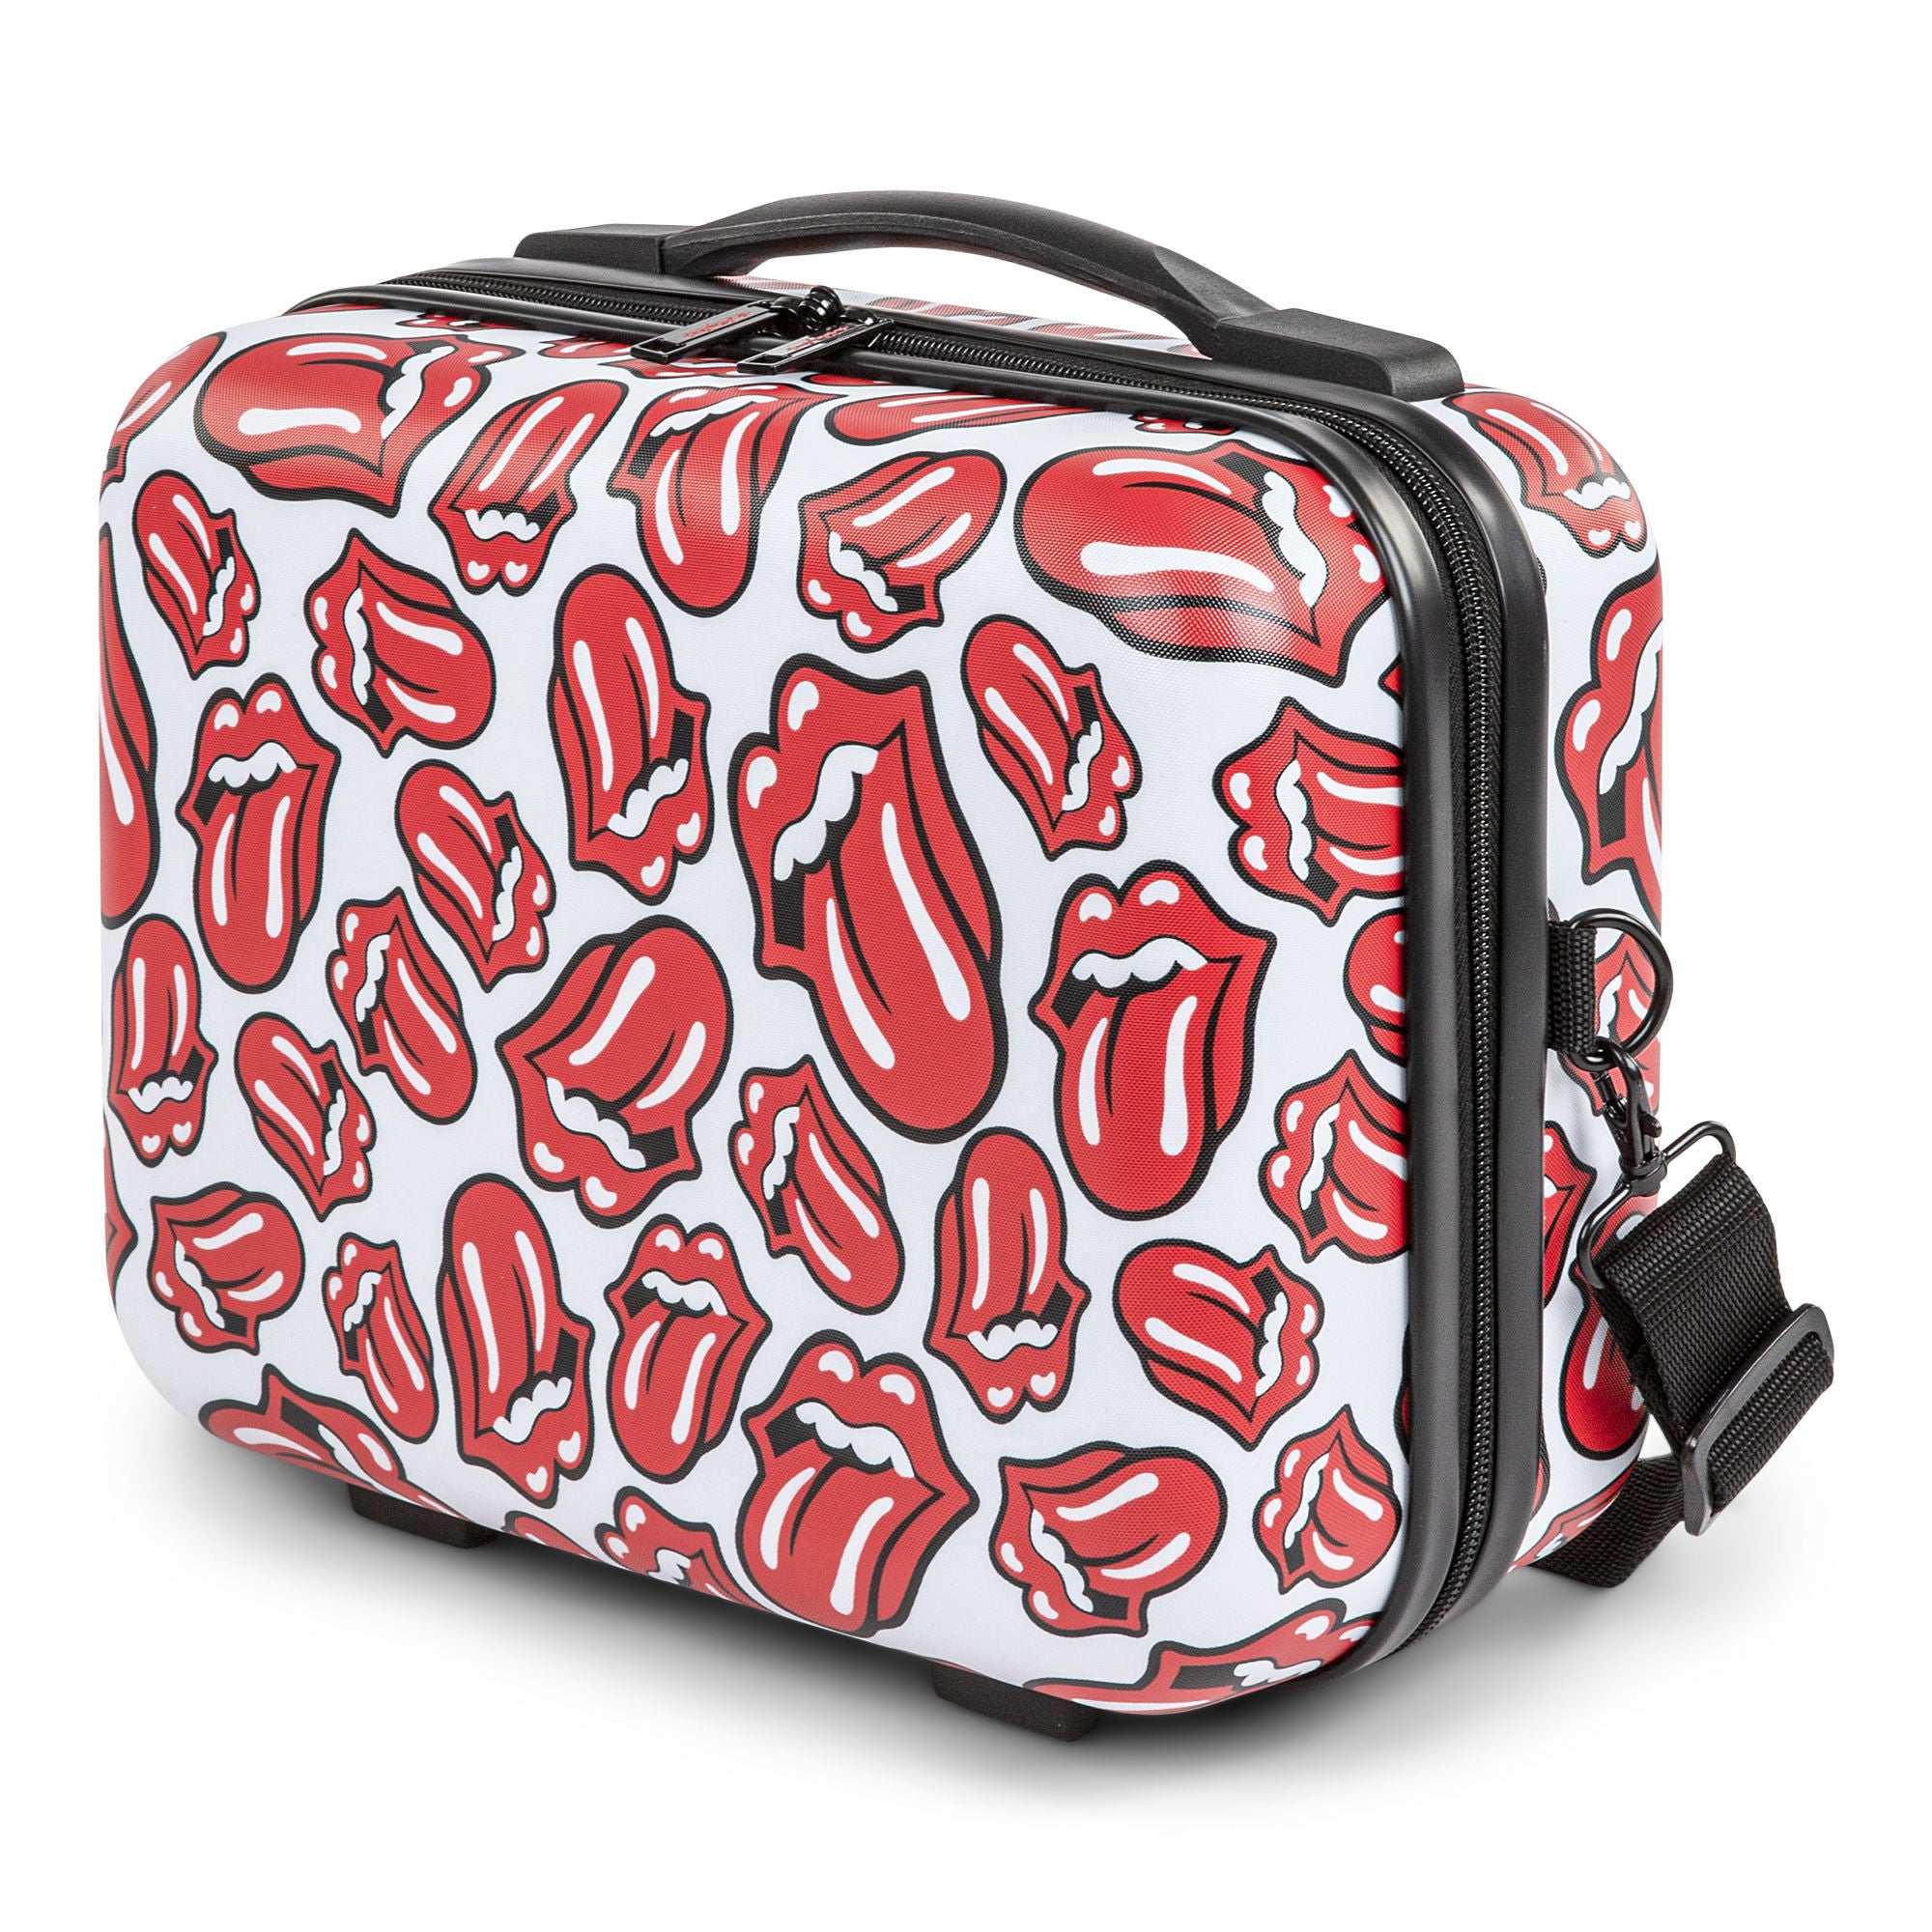 The Rolling Stones - 4pc Official Rolling Stones Traveller Luggage Set